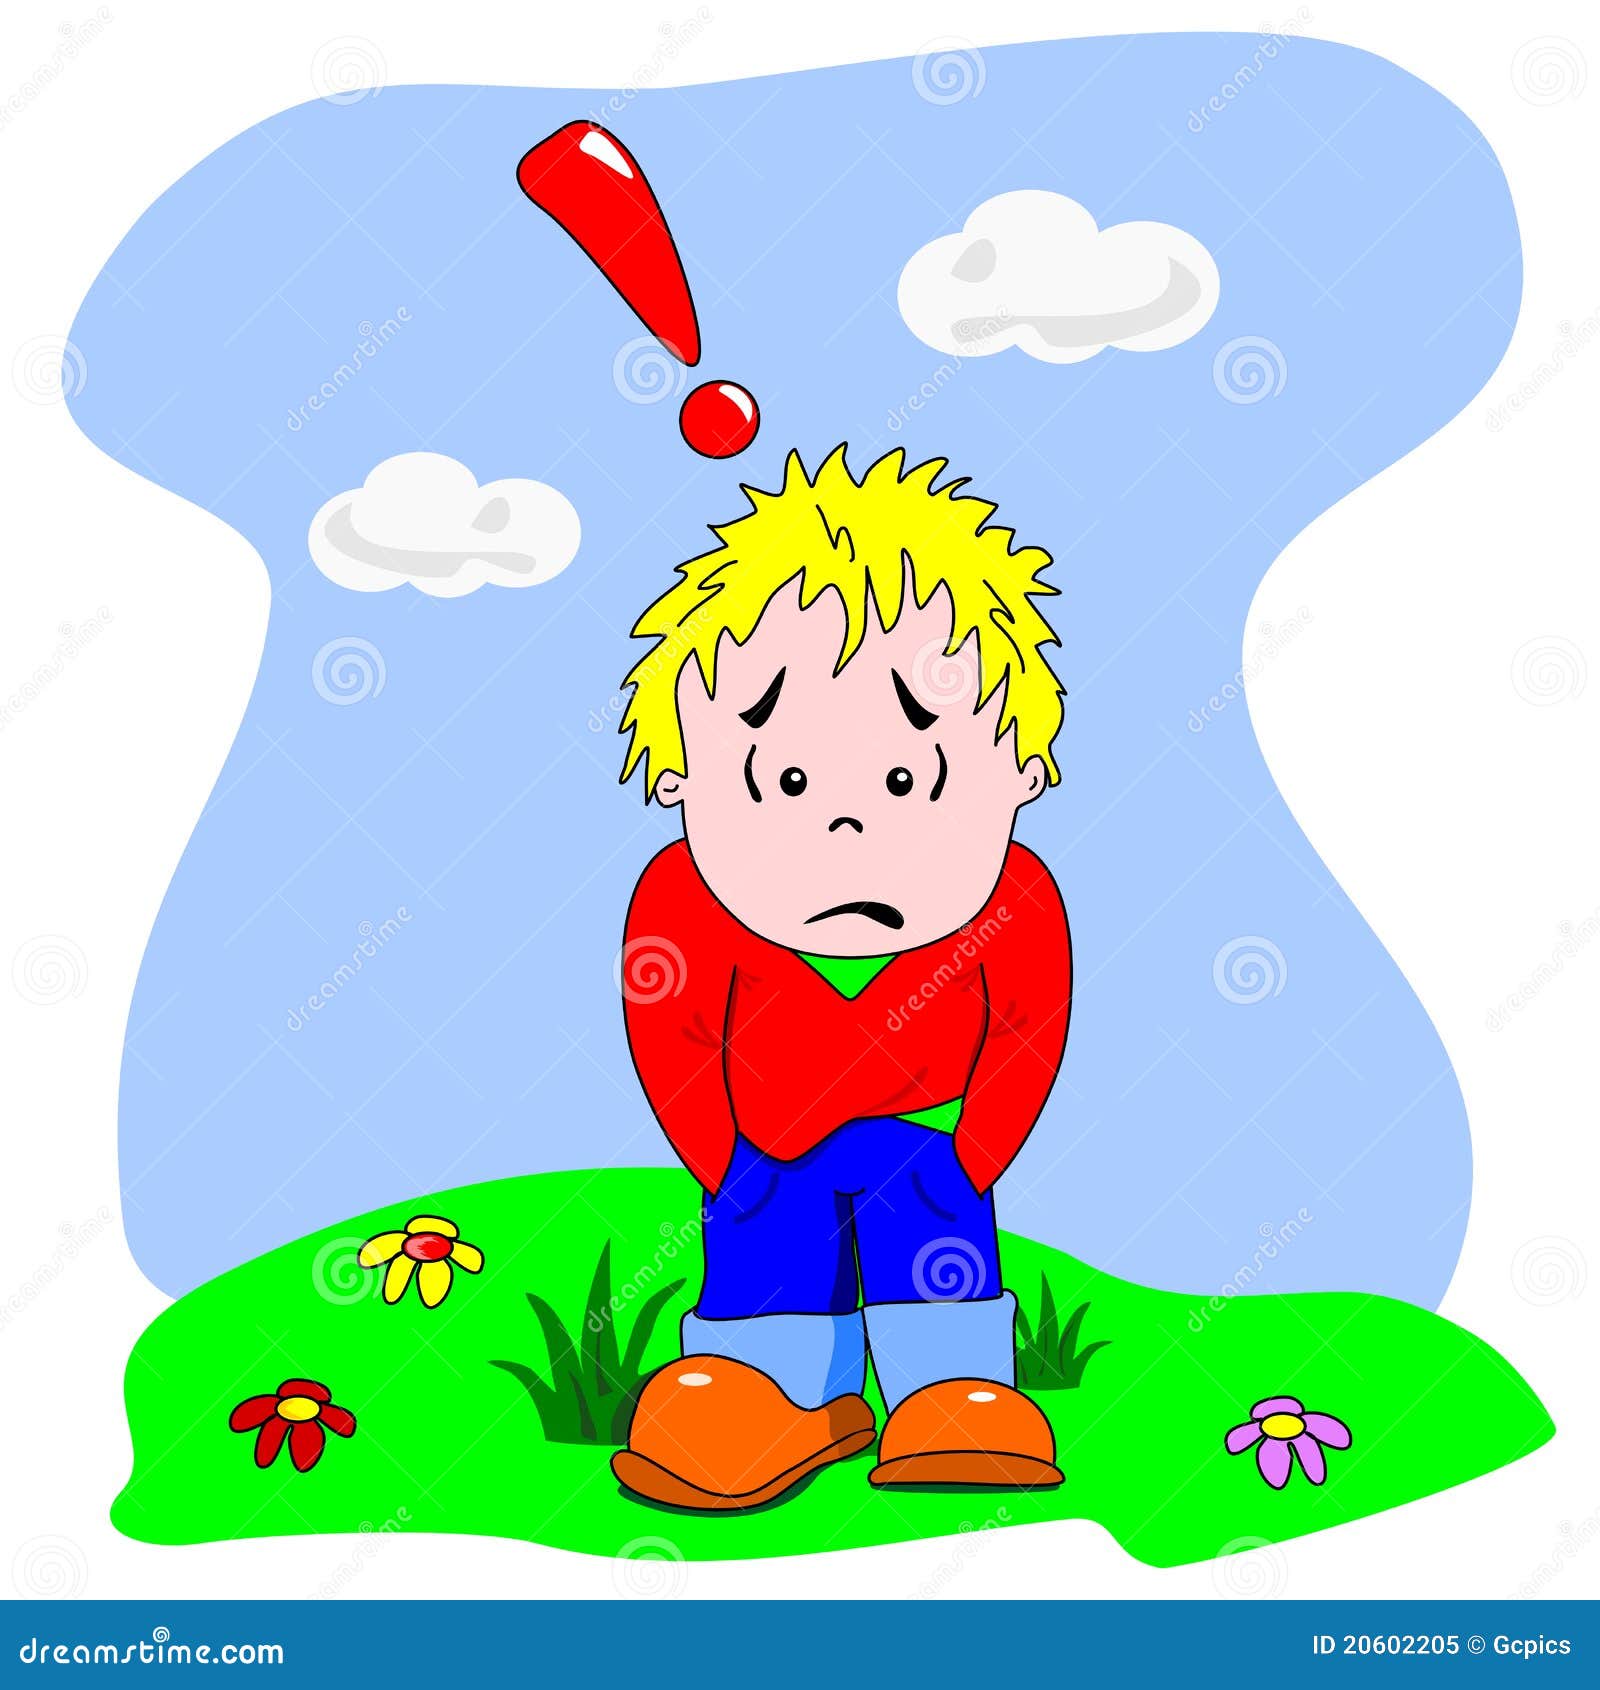 Image result for cartoon of boy sad and thinking